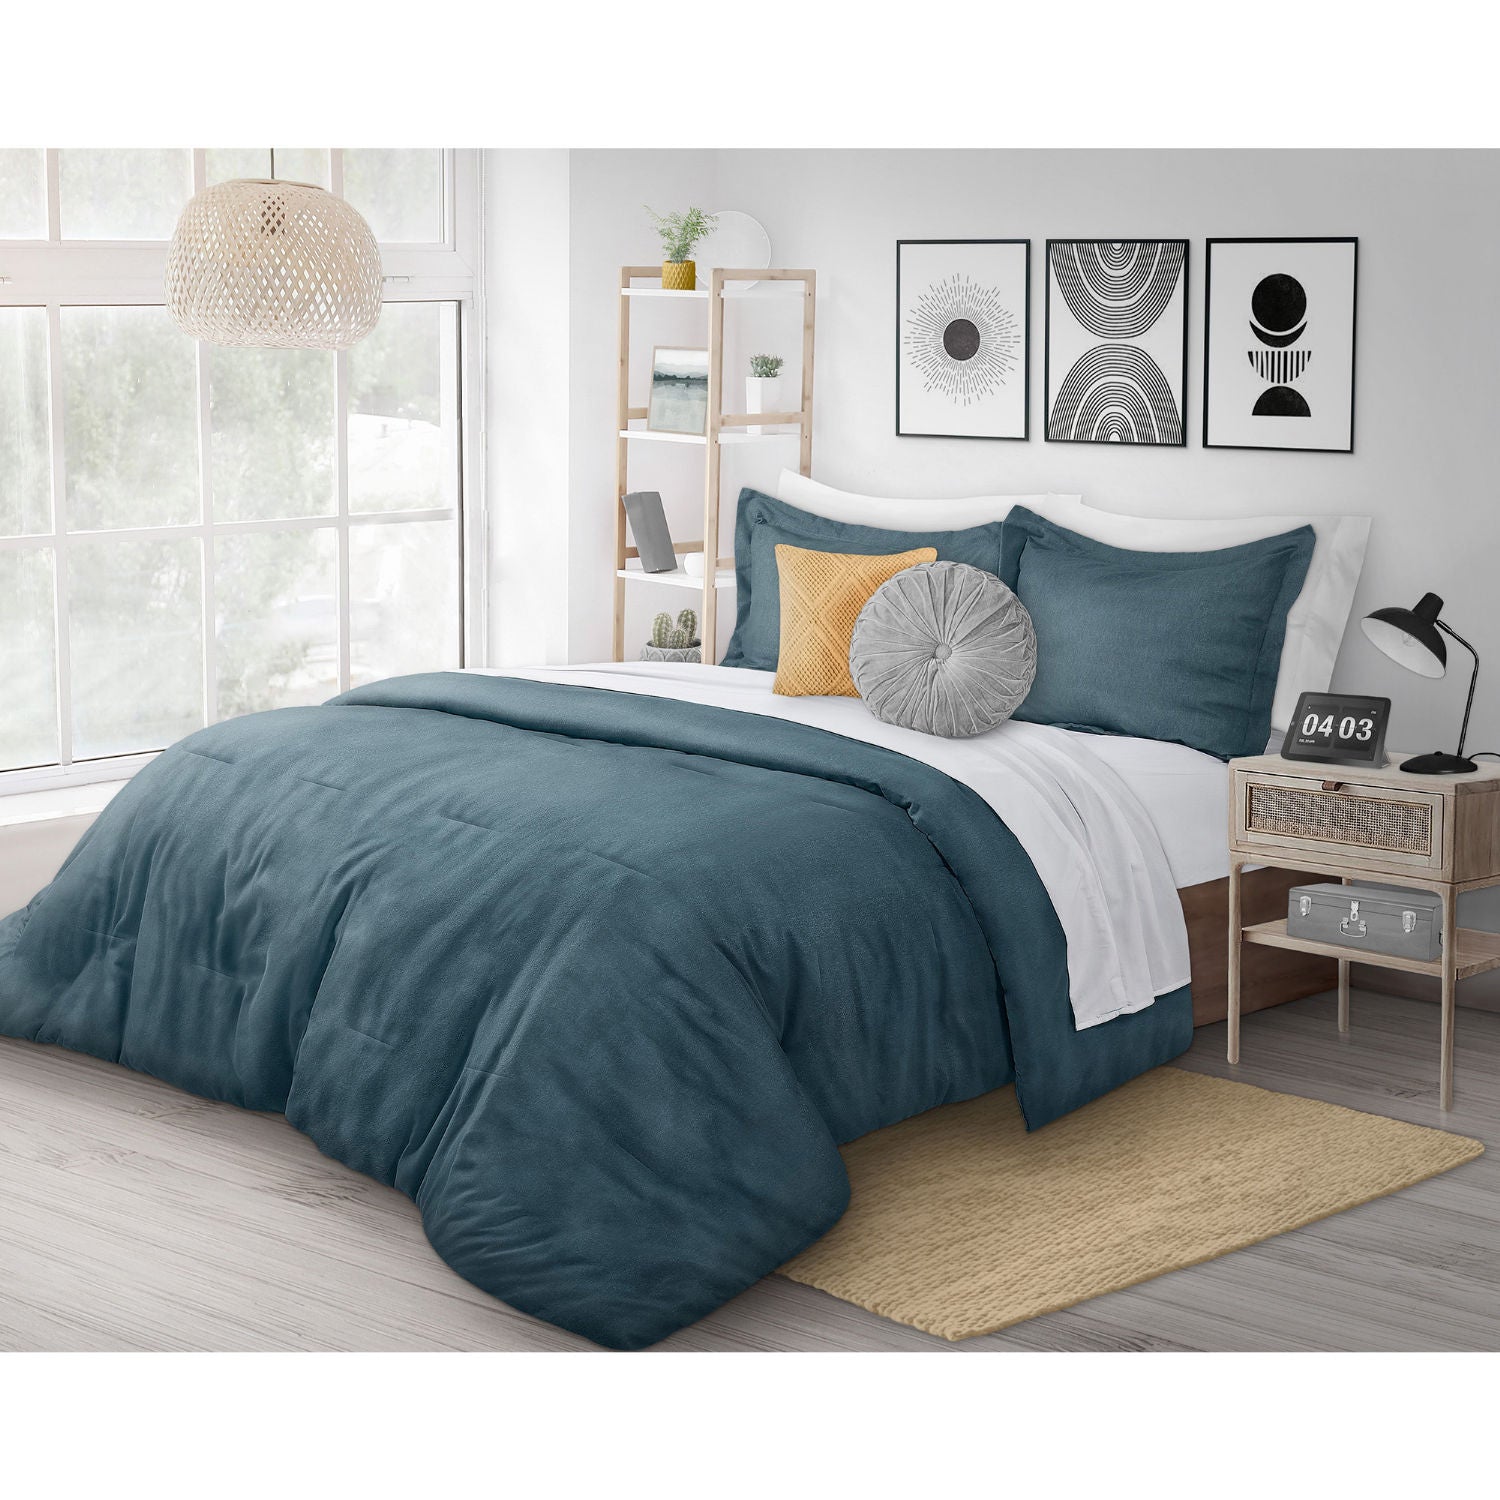 Woven Heathered Flannel Comforter 2 Pc Set- King. Teal